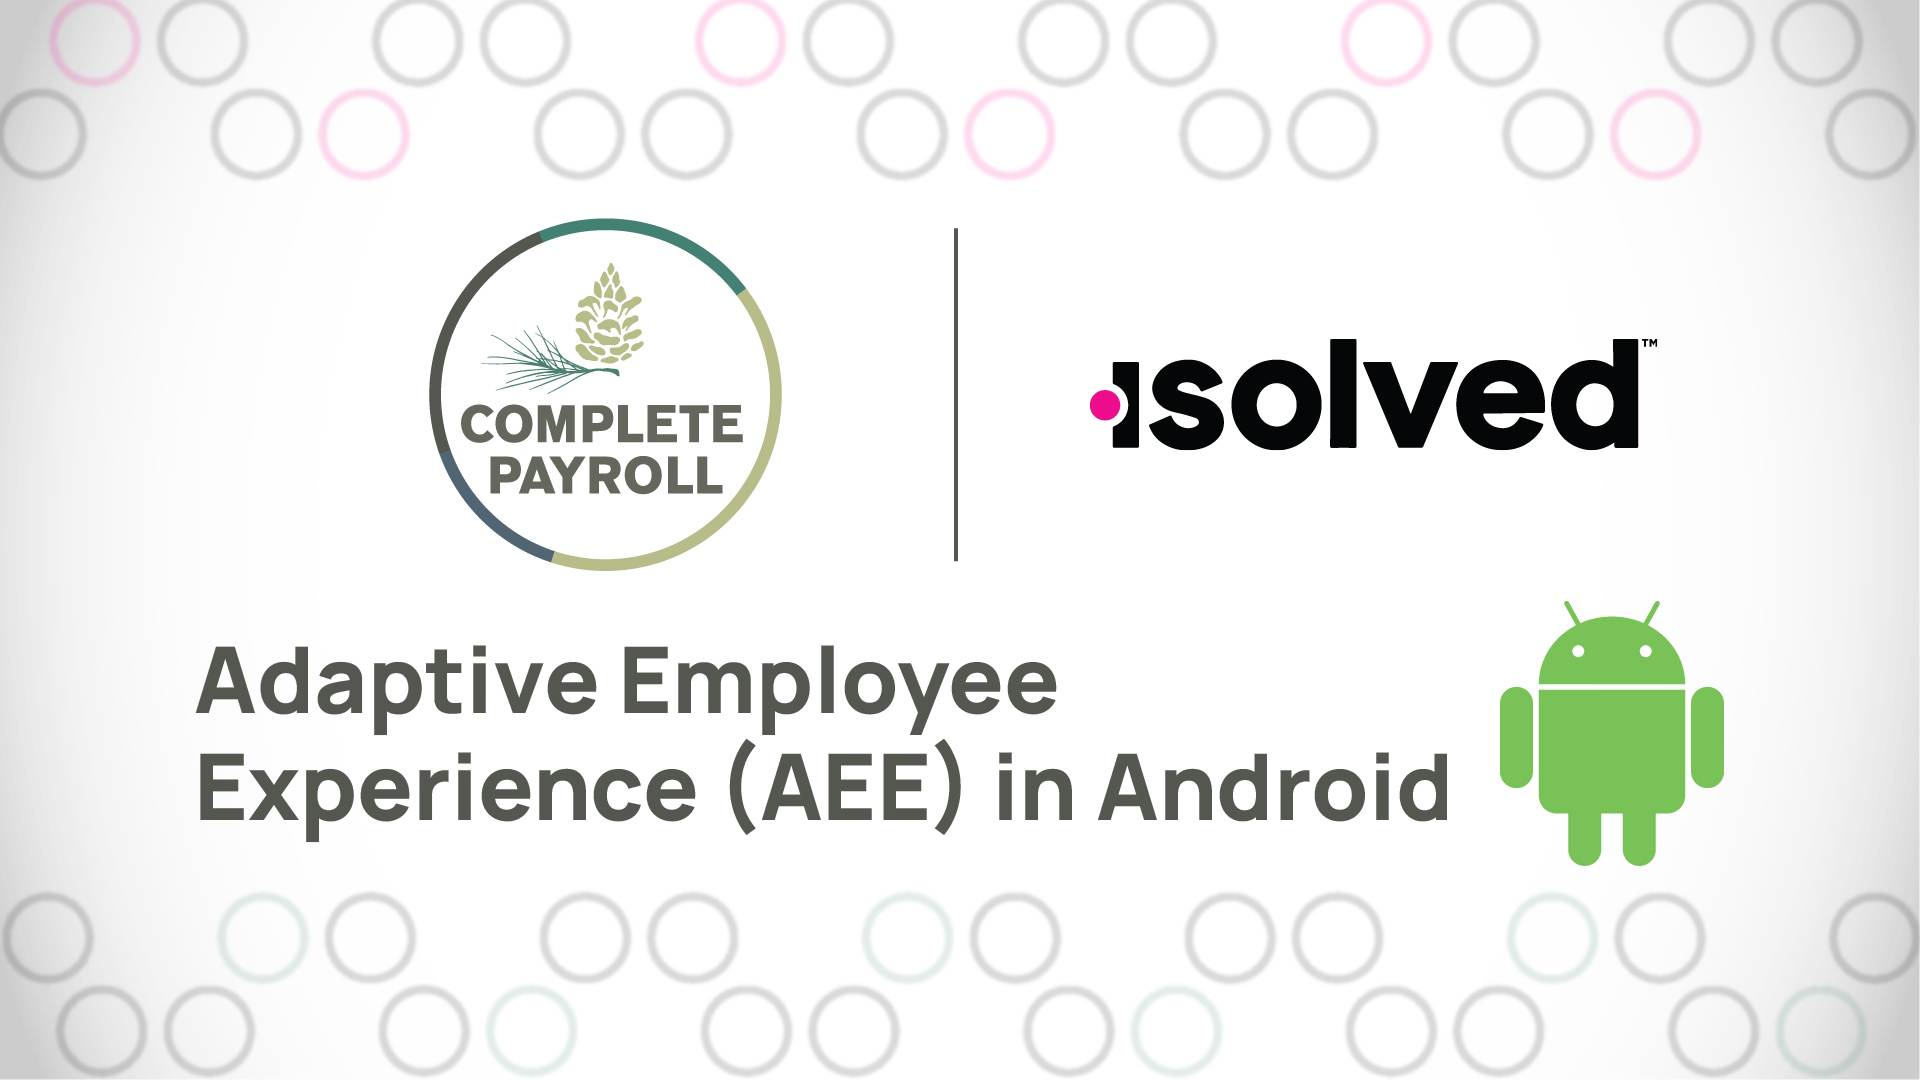 Adaptive Employee Experience in Android